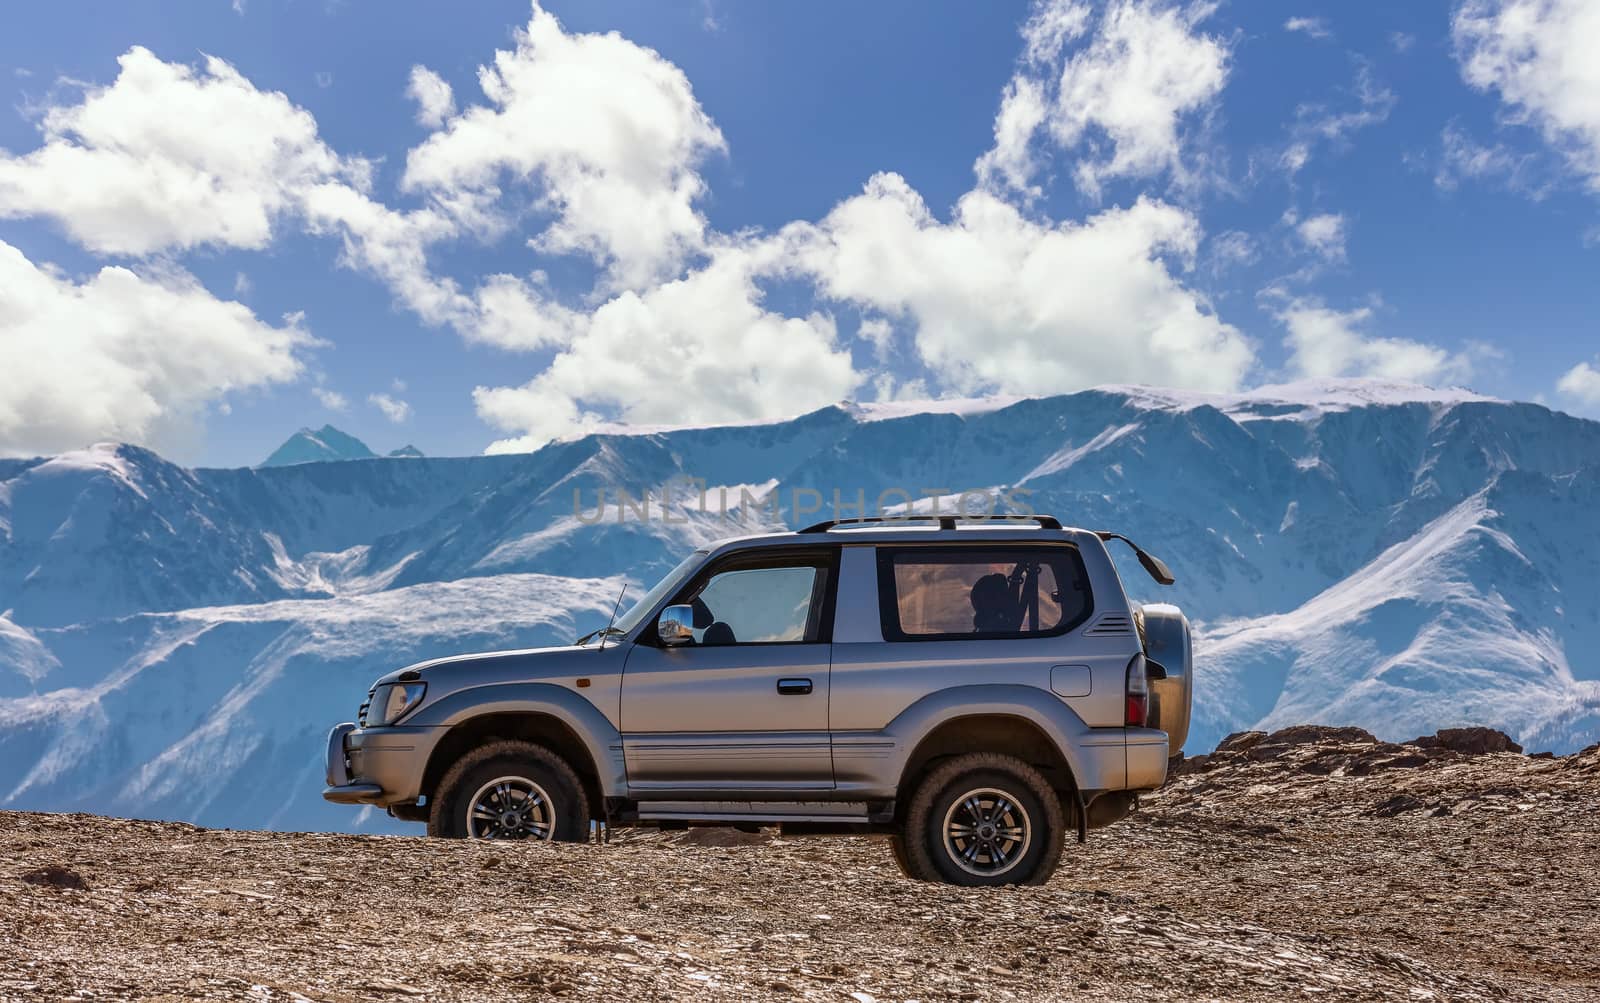 Scenic view of an off-road vehicle parked in the mountains. White snowy mountain ridge and beautiful blue sky as a background slightly out of focus. Altai mountains, Siberia, Russia by DamantisZ